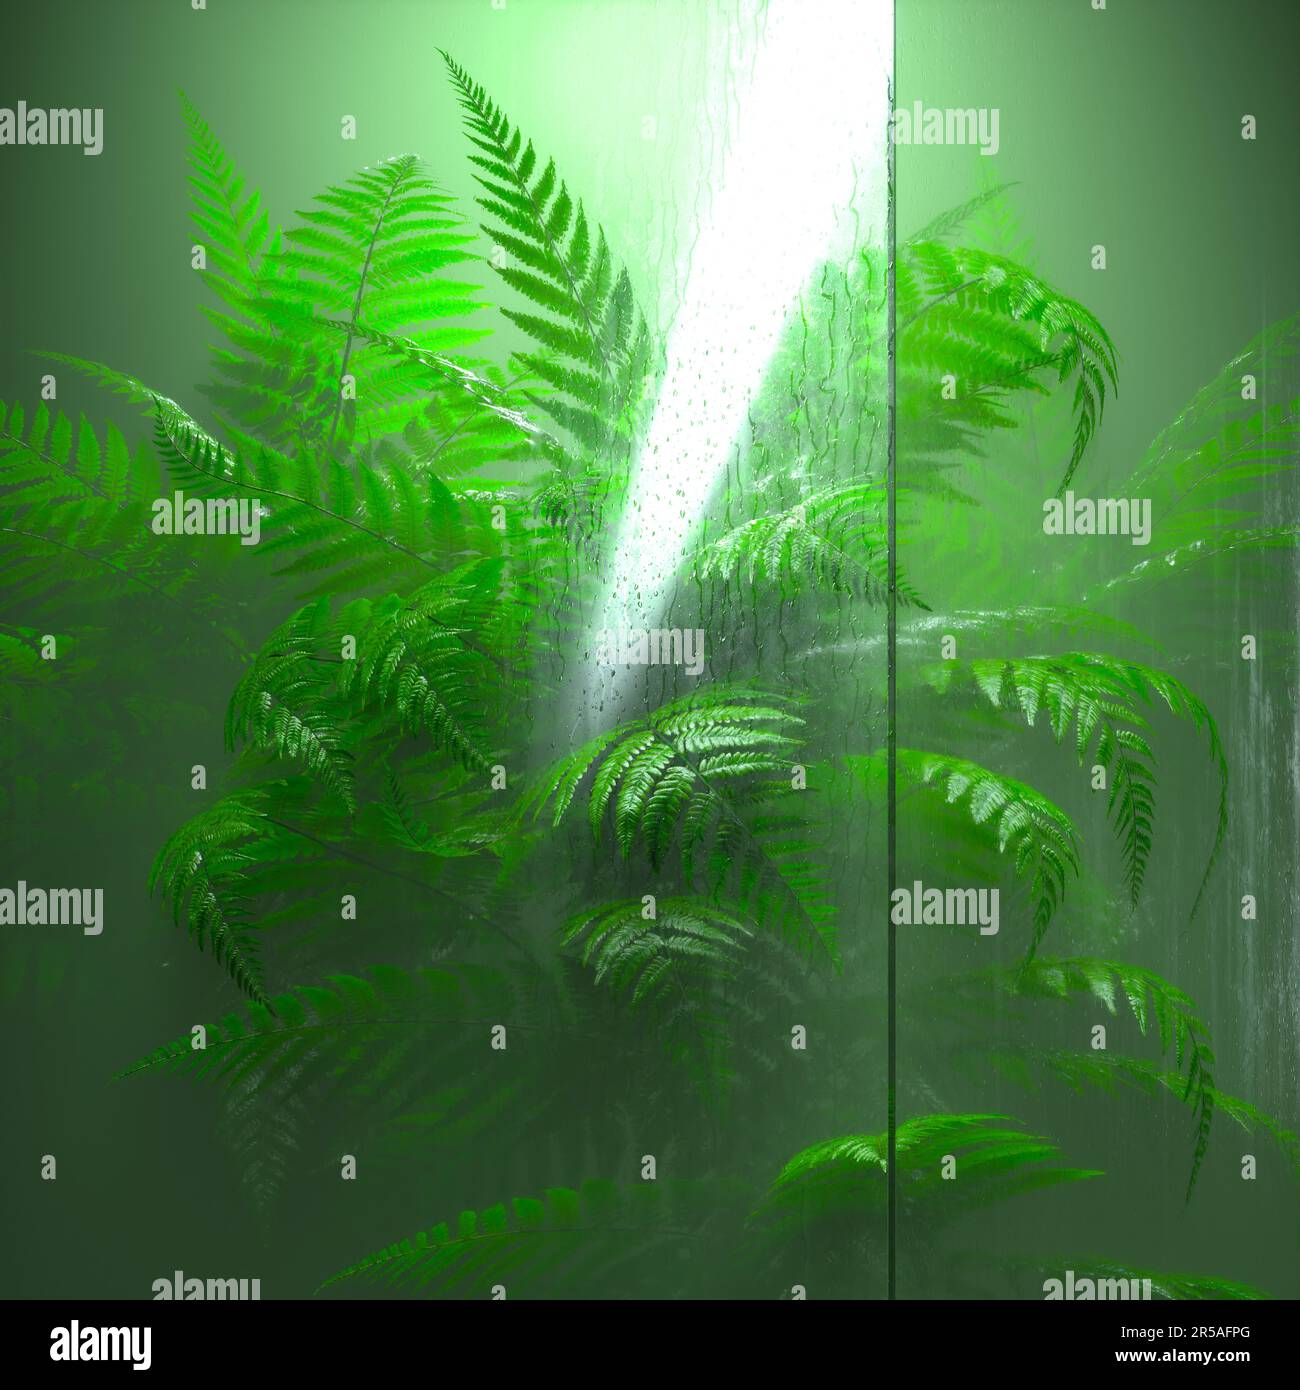 Green fern leaves behind the glass. Natural forest's plants in the glasshouse. Foliage from a tropical environment. Blurry vision. Nature. Botany. Bot Stock Photo